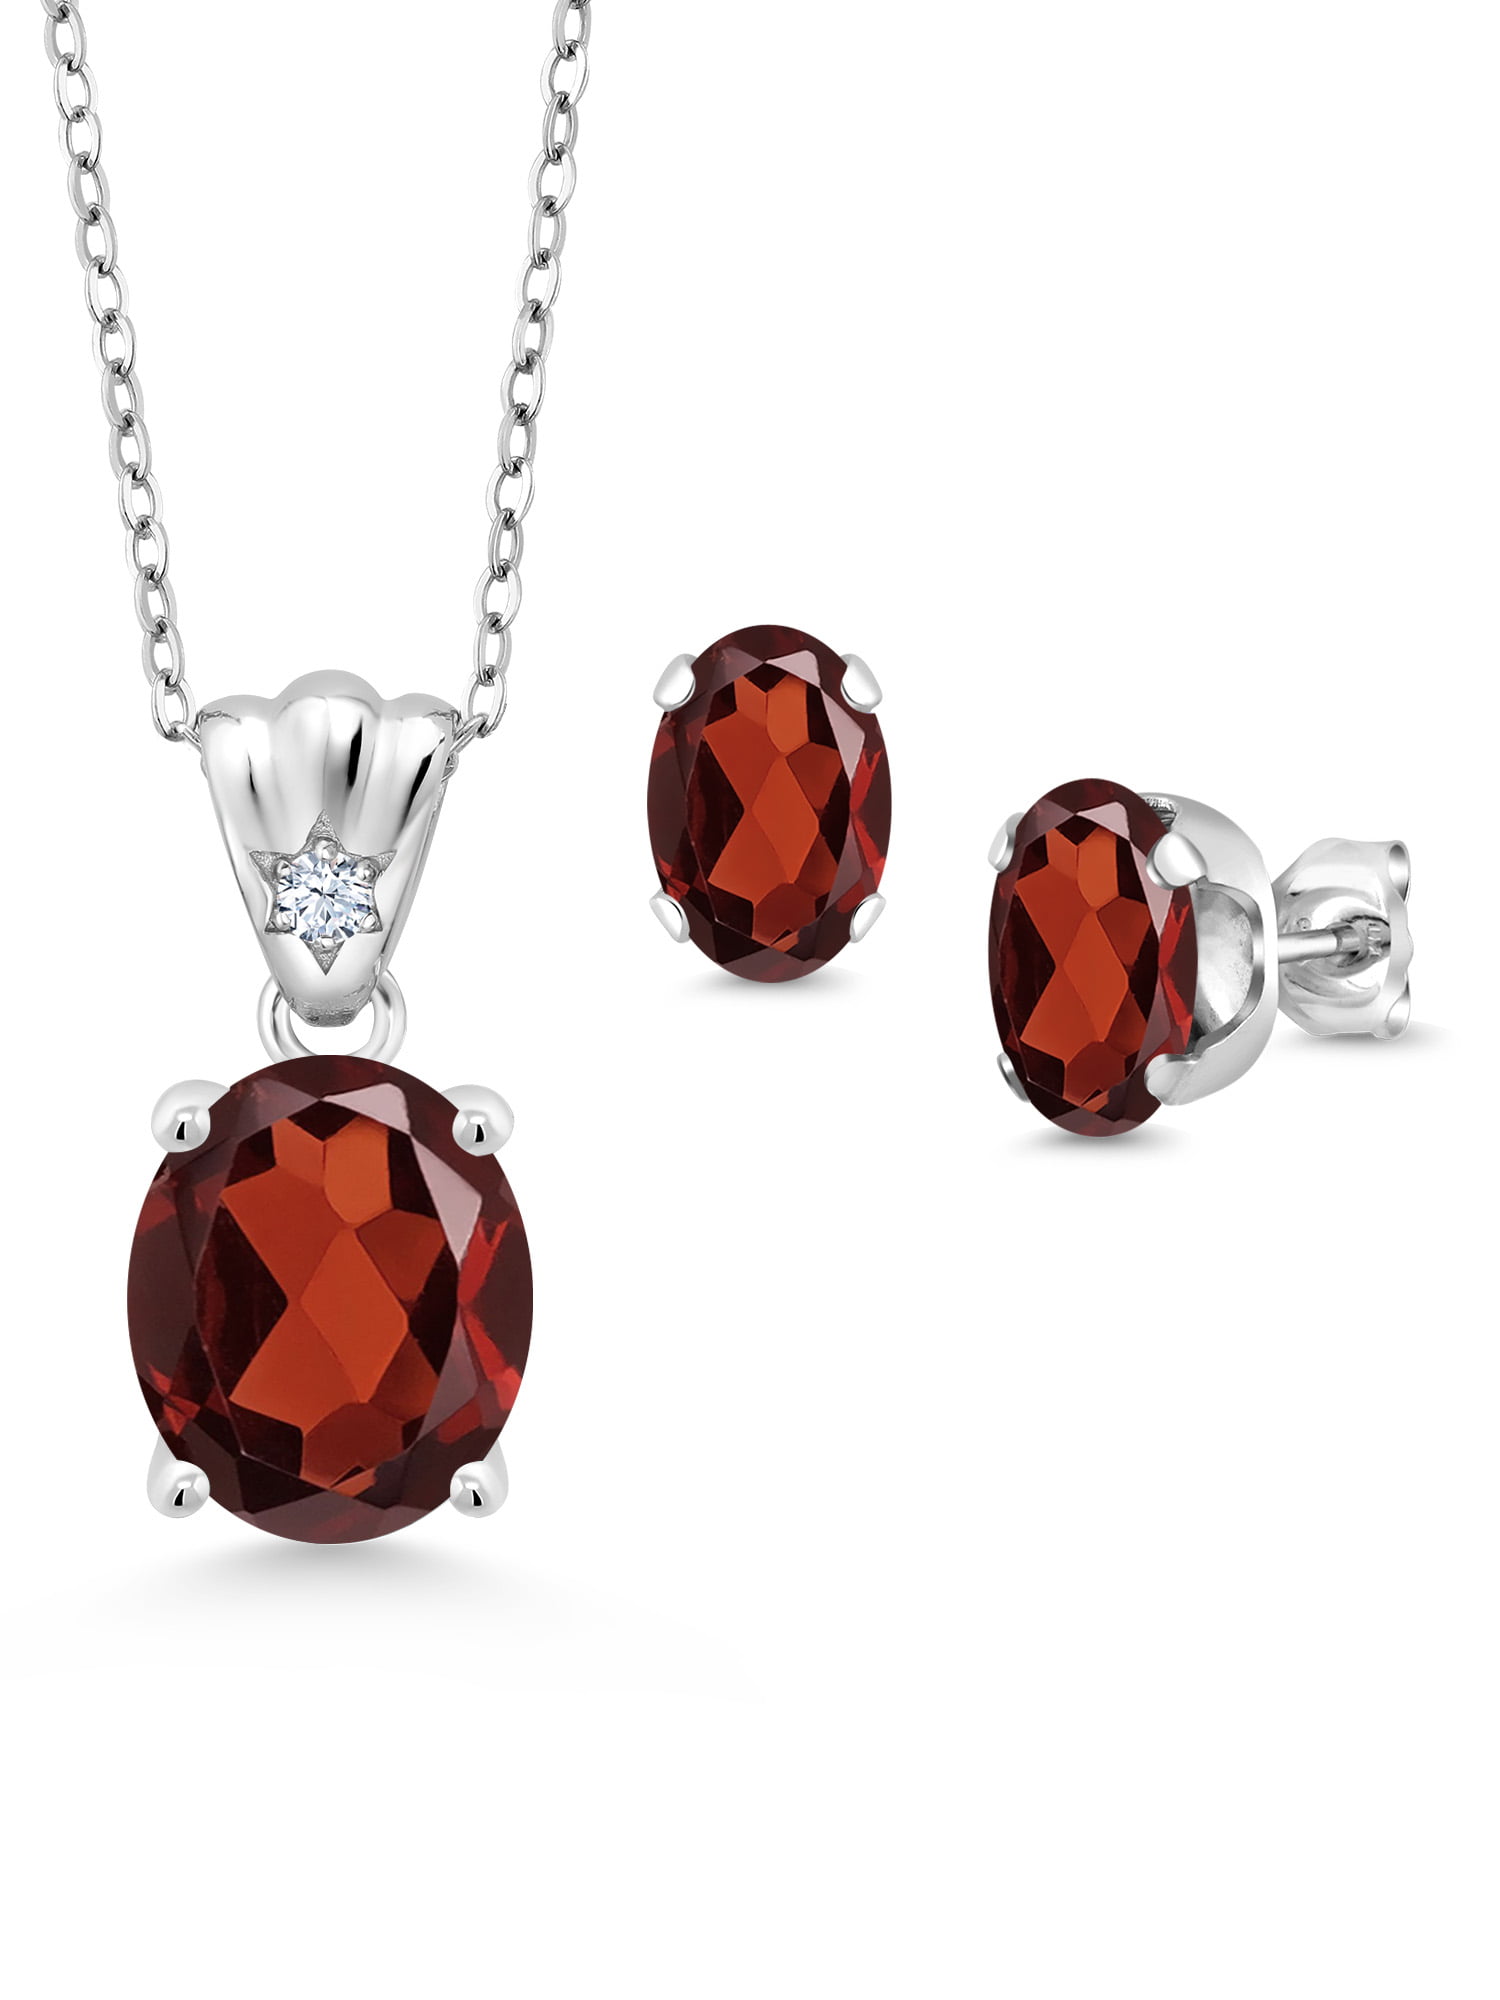 Birthstone Natural Red Fire Garnet Platinum Plated Necklace Pendant Free Chain 